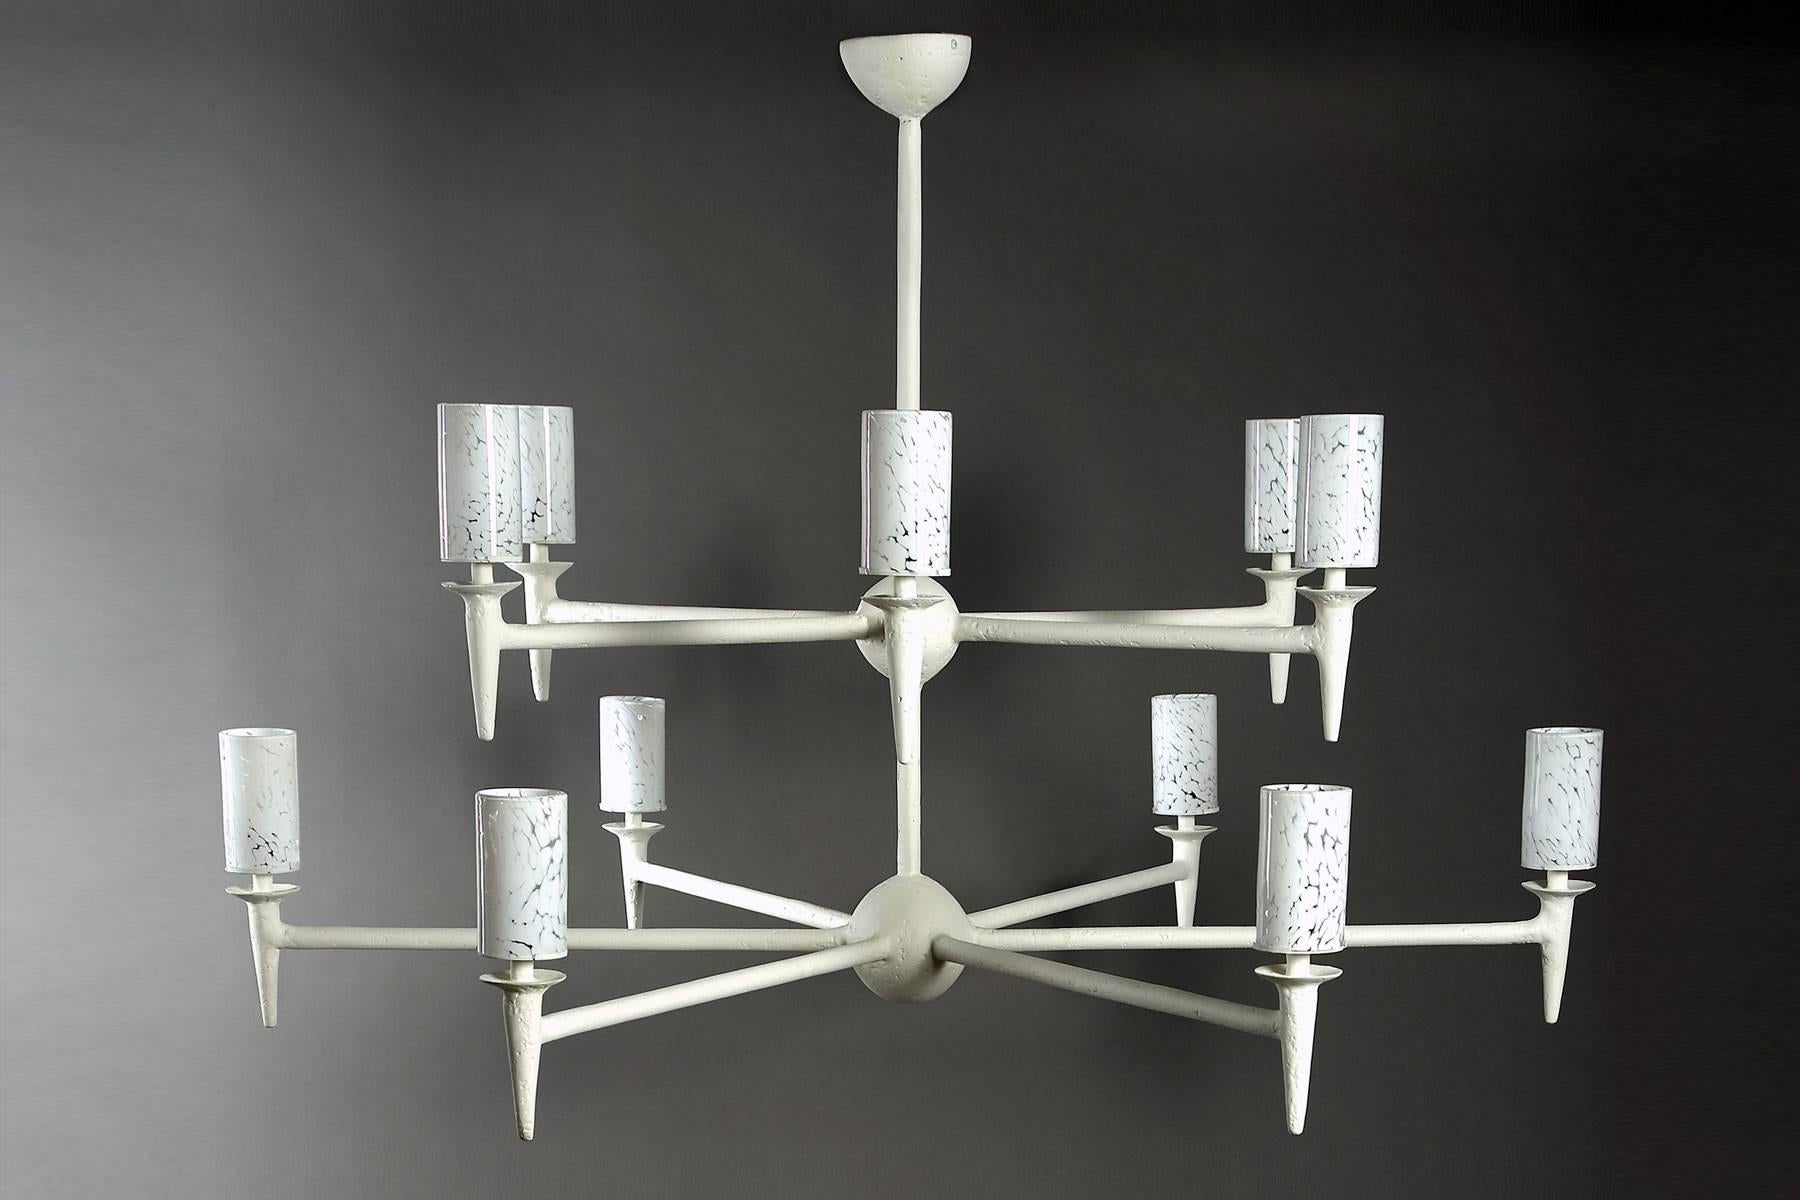 This large chandelier which is part of our Plaster of Paris Lighting collection, can be made custom. This model features 12 arms on two tiers. The light is diffused through the handblown glass cylinders which provide a beautiful glow. Two options